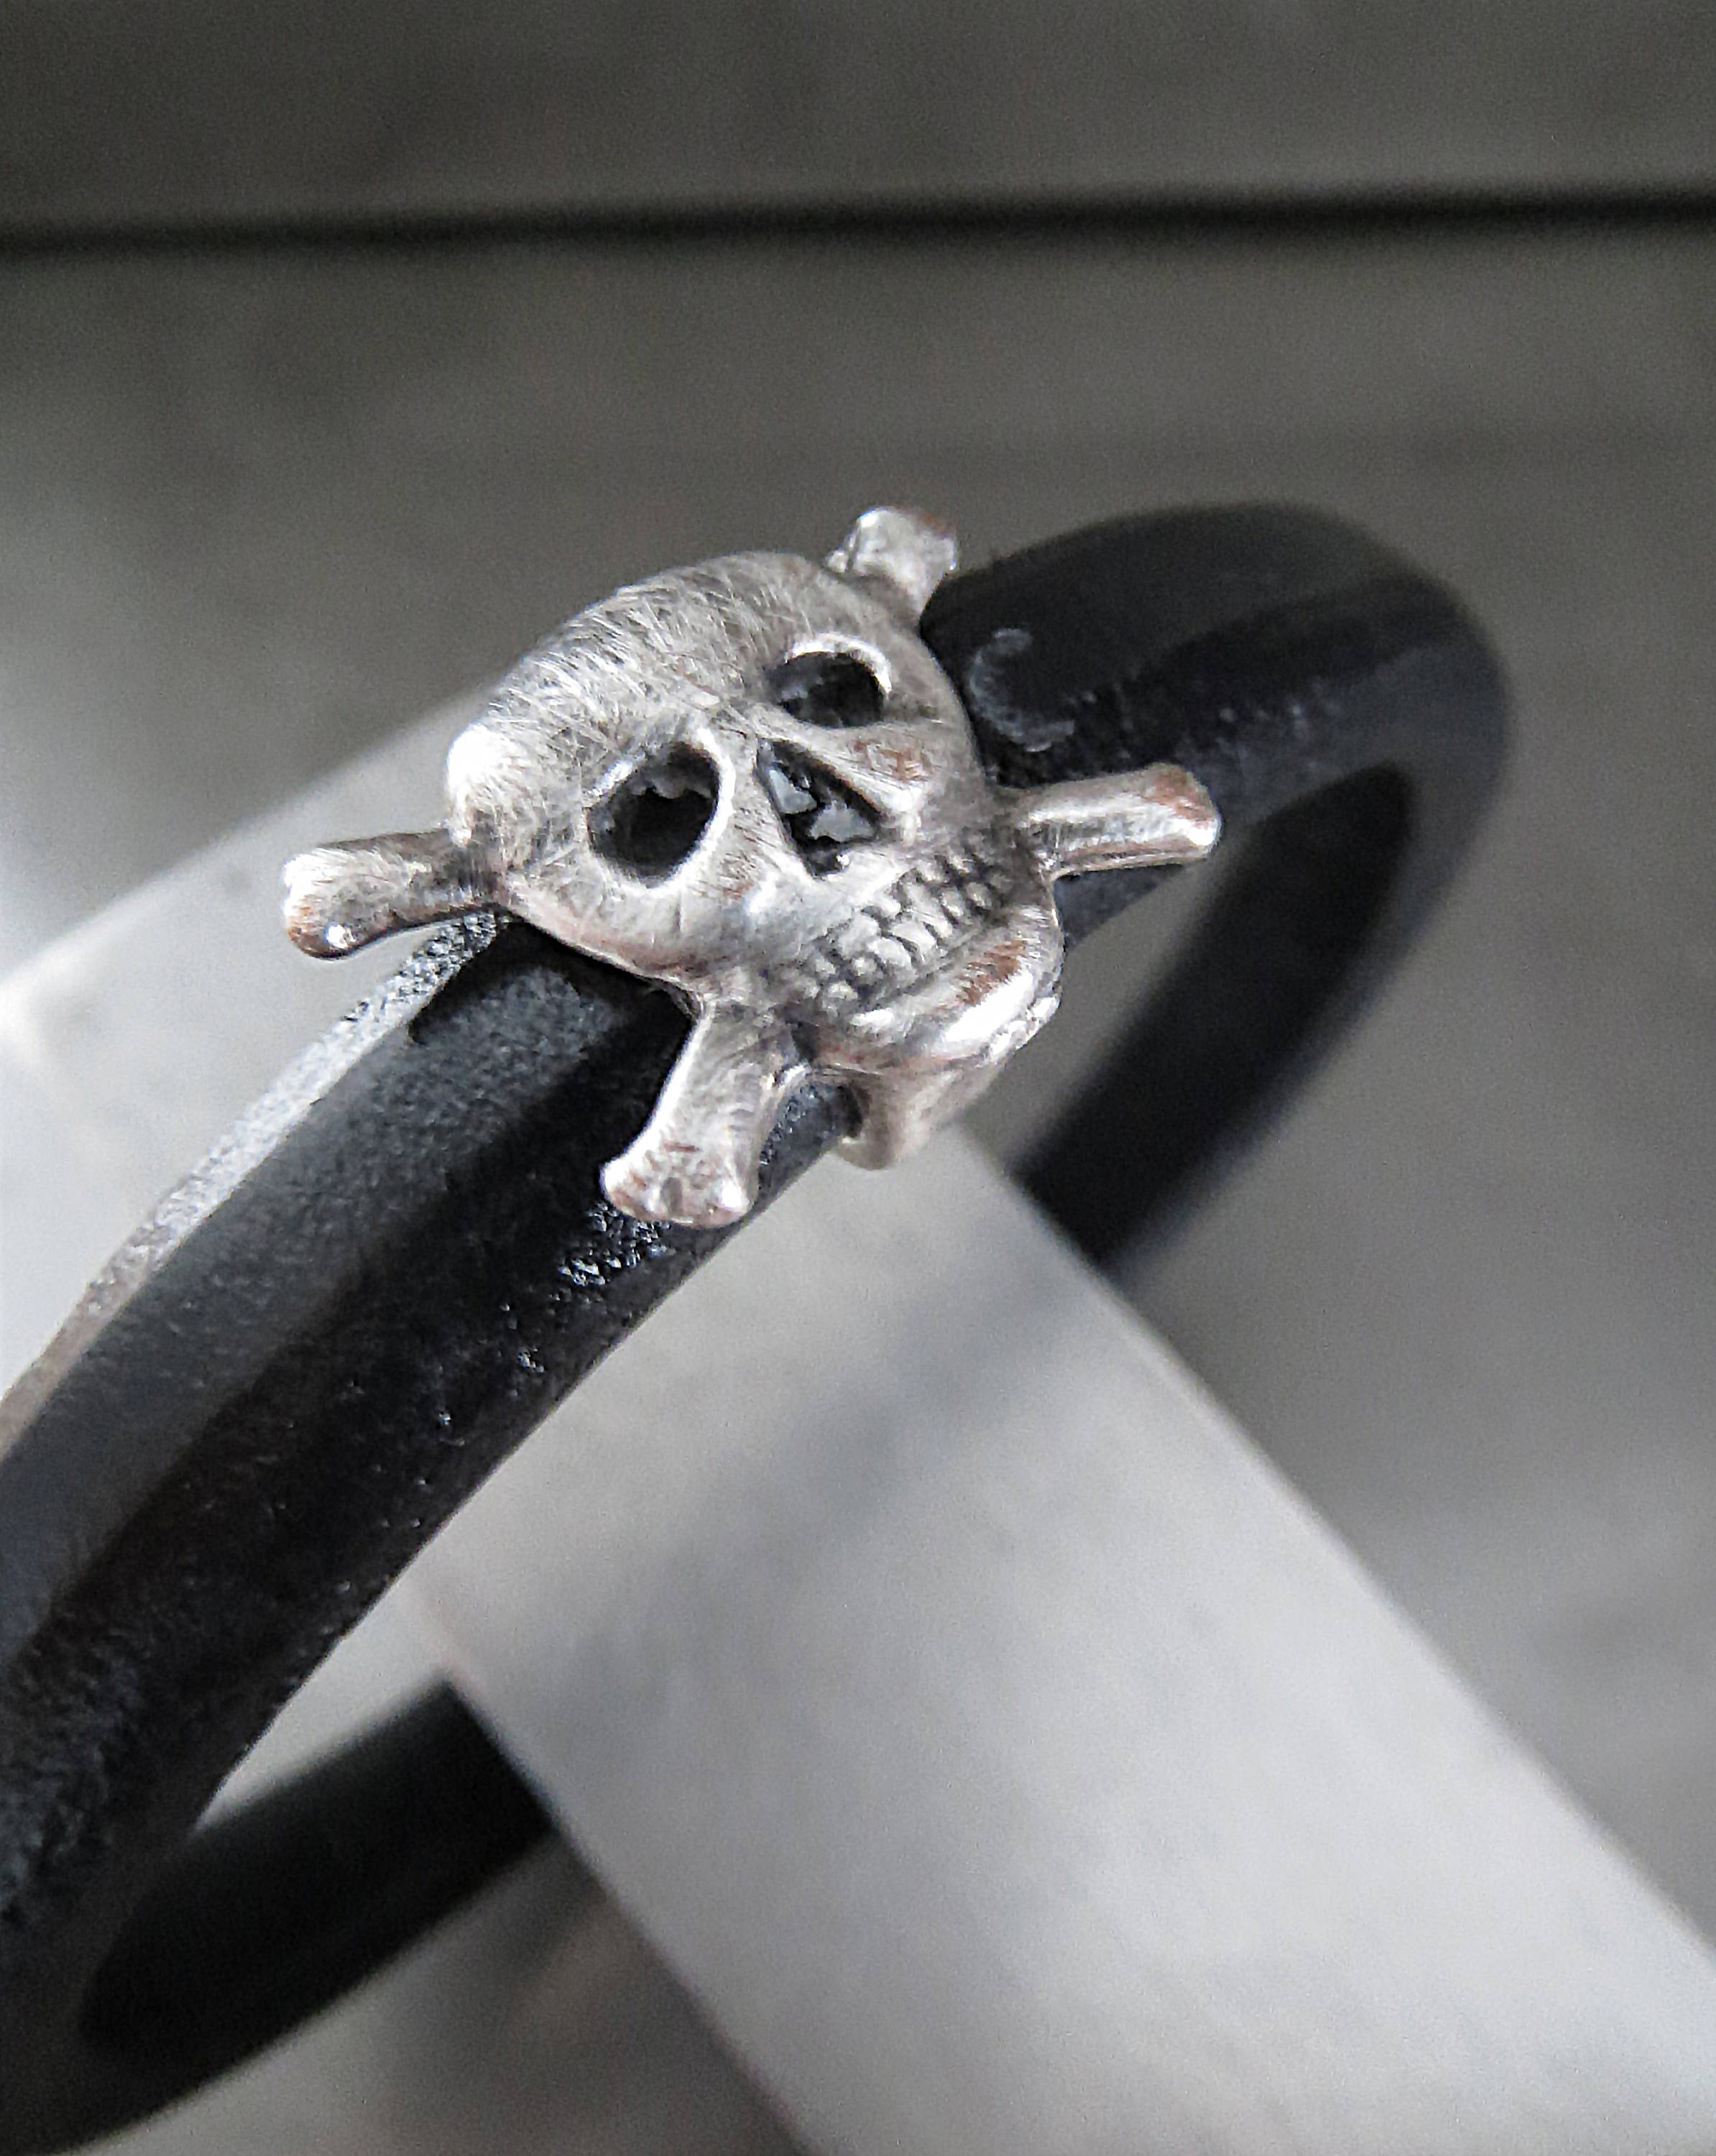 Black Leather Bracelet with Silver Skull and Cross Bones